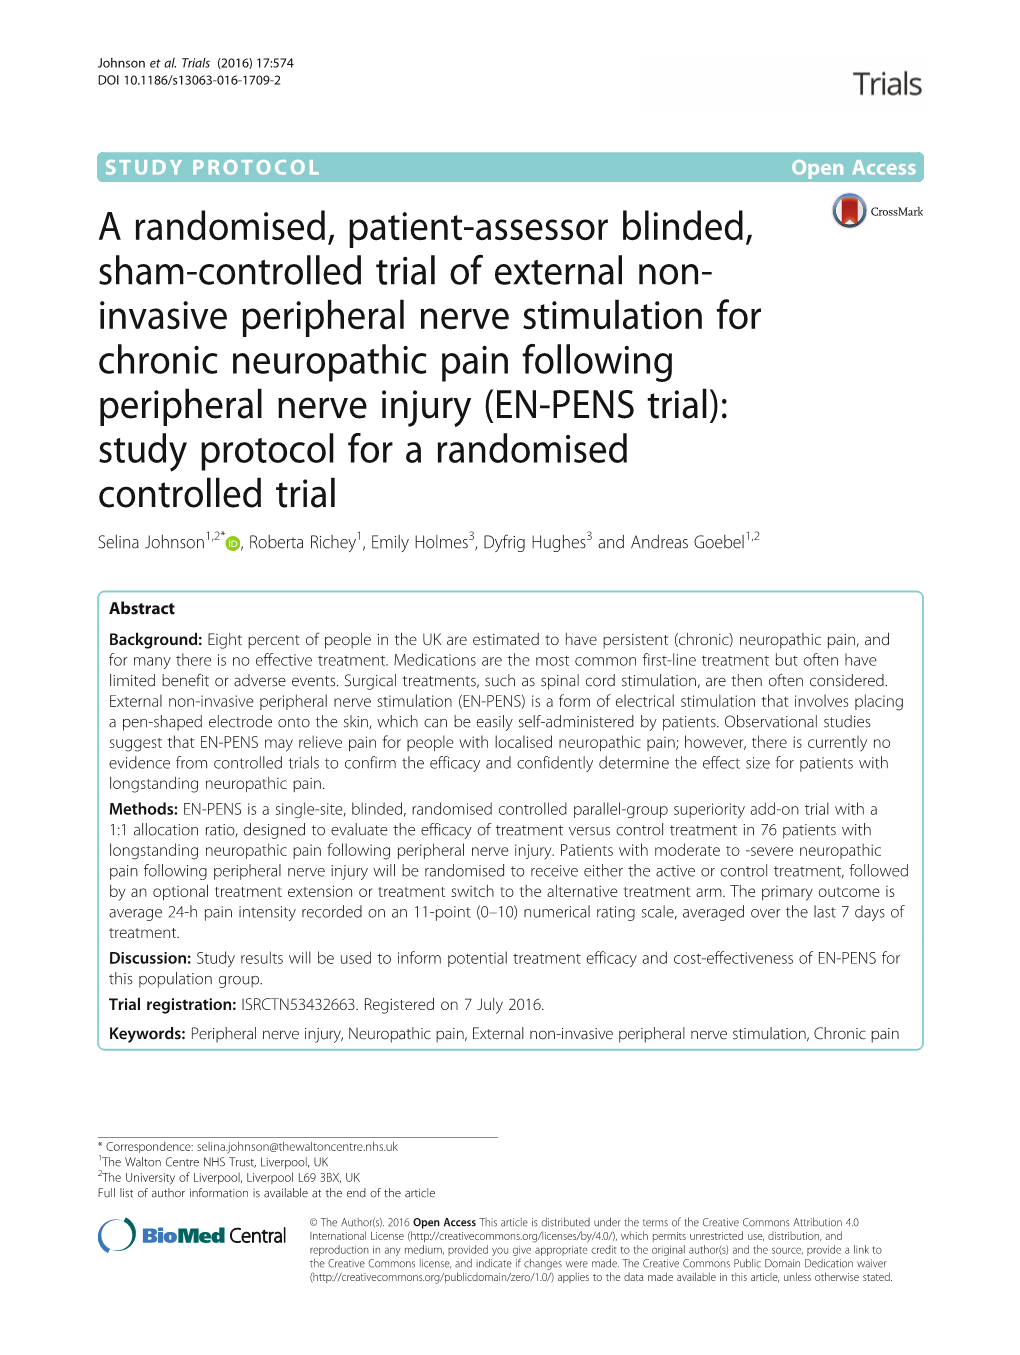 A Randomised, Patient-Assessor Blinded, Sham-Controlled Trial Of